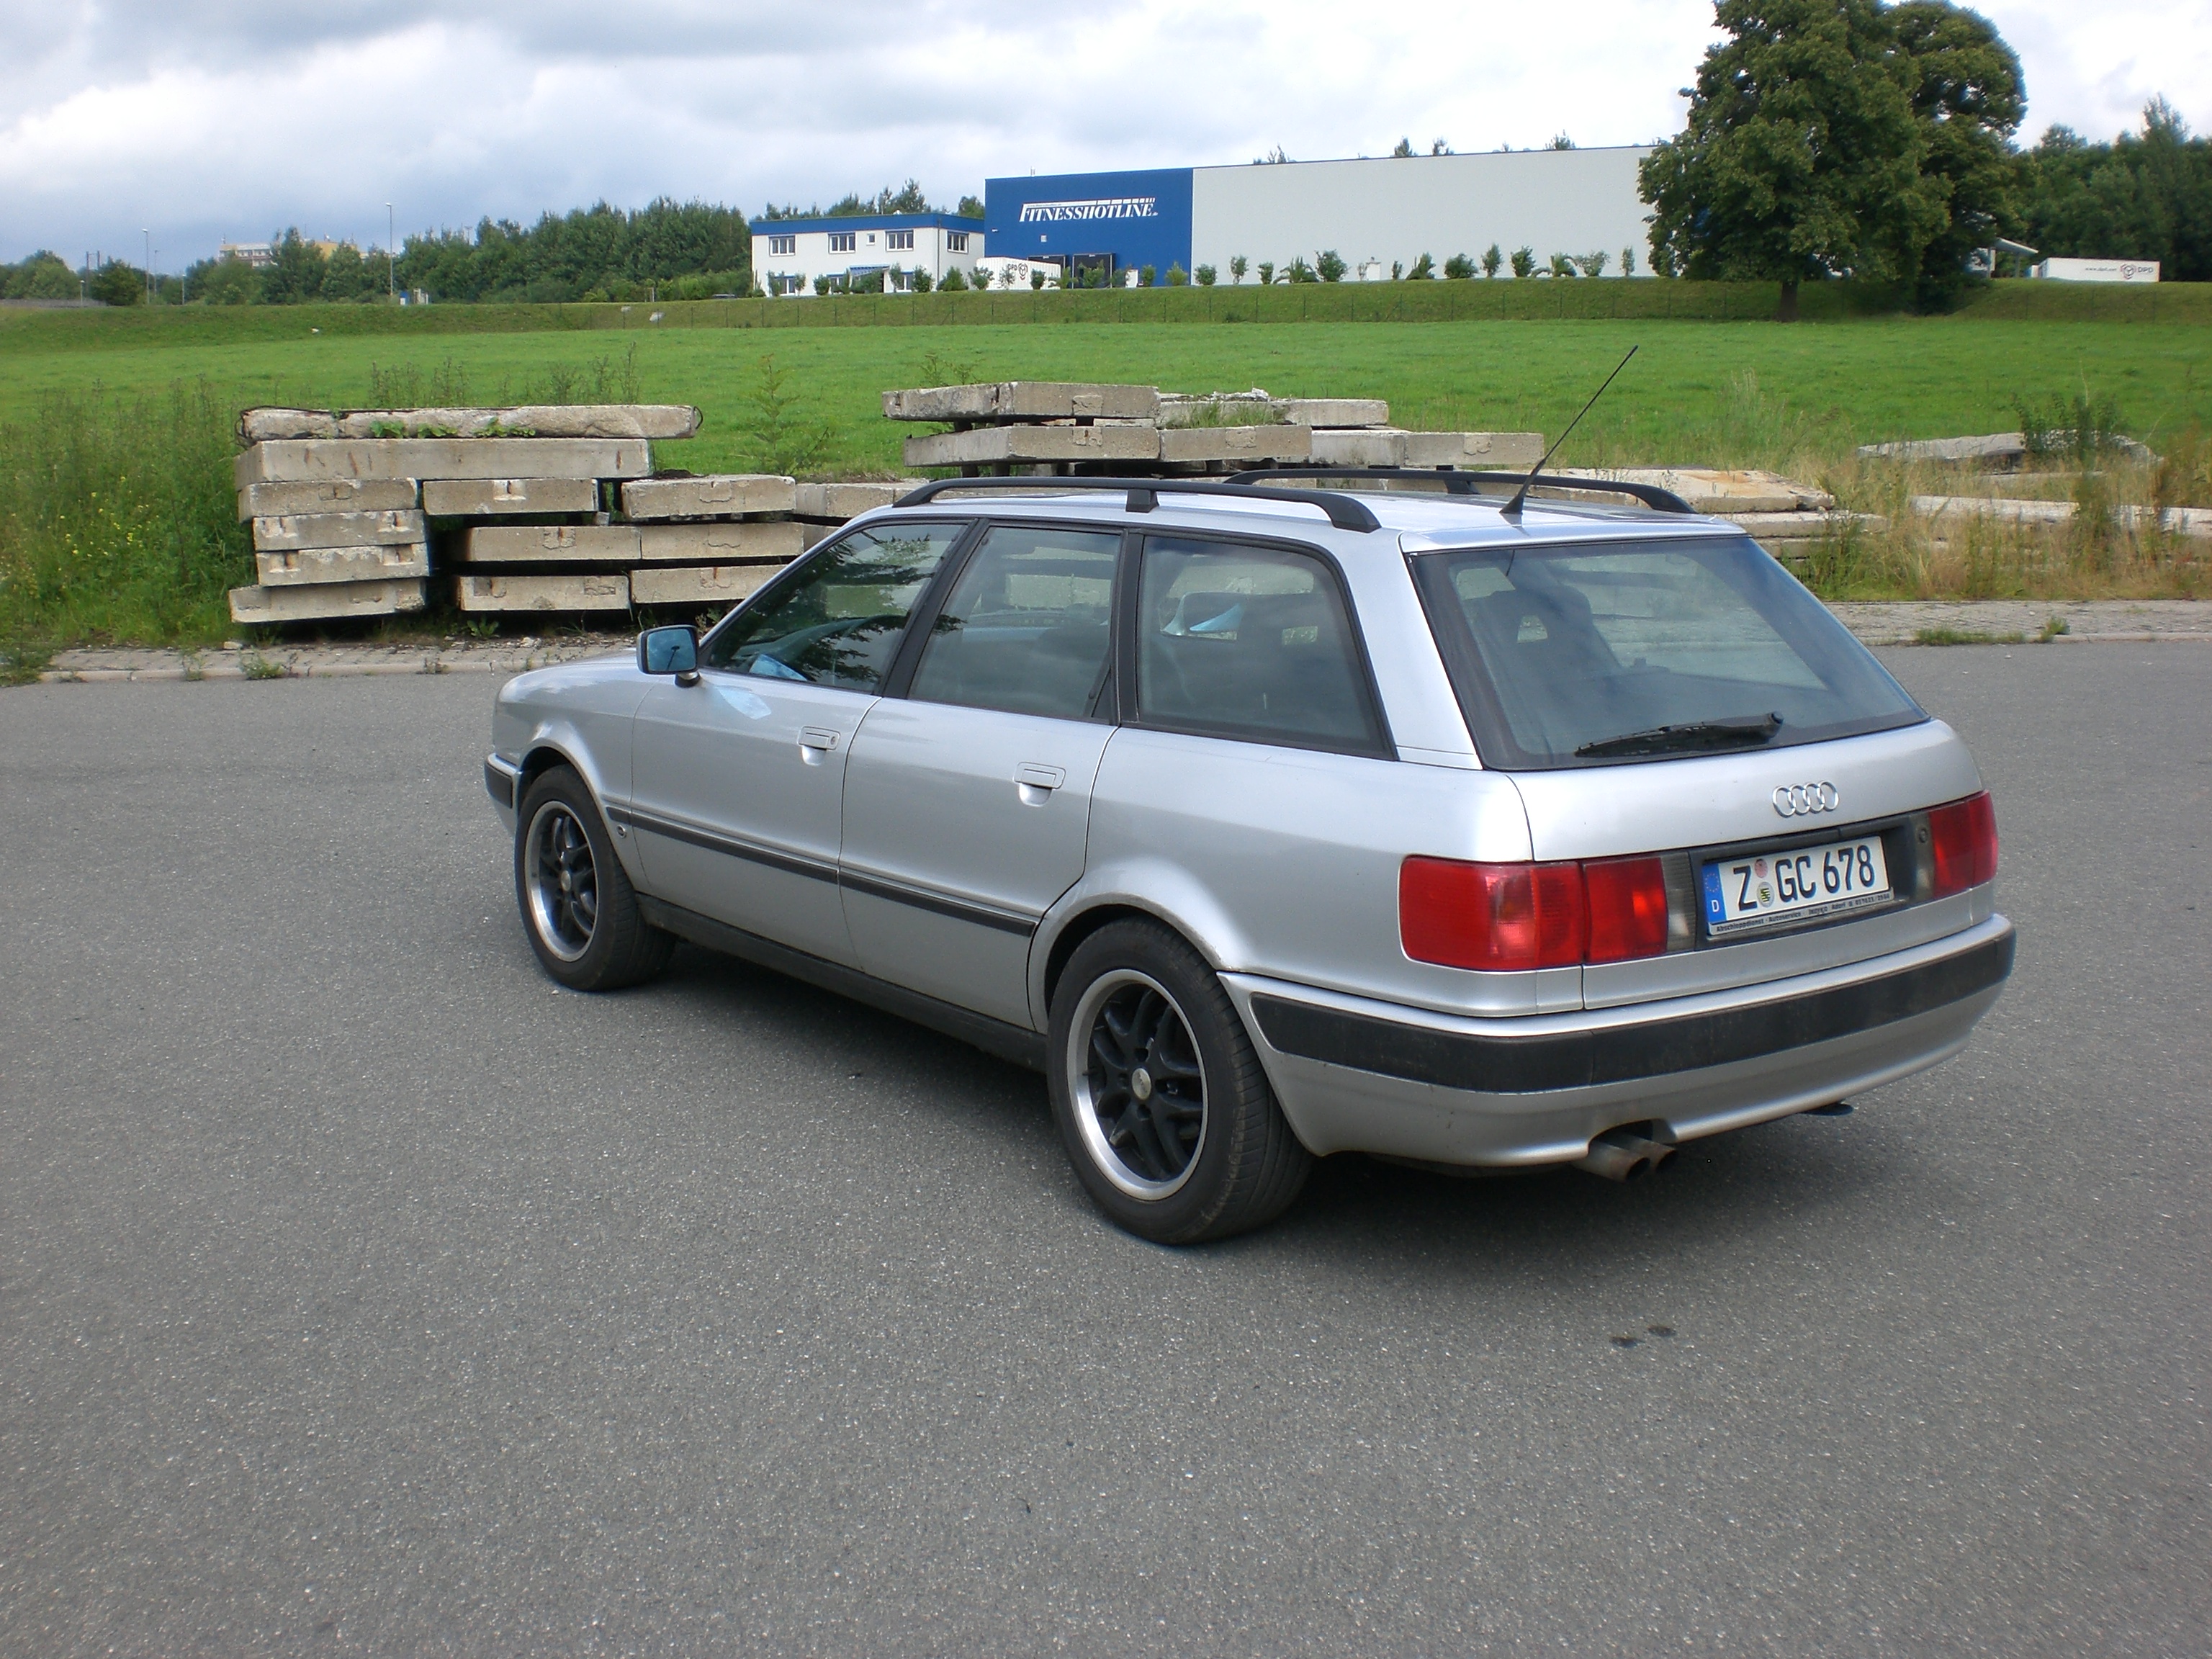 1992 Audi 80 Avant 2.0 E related infomation,specifications ...